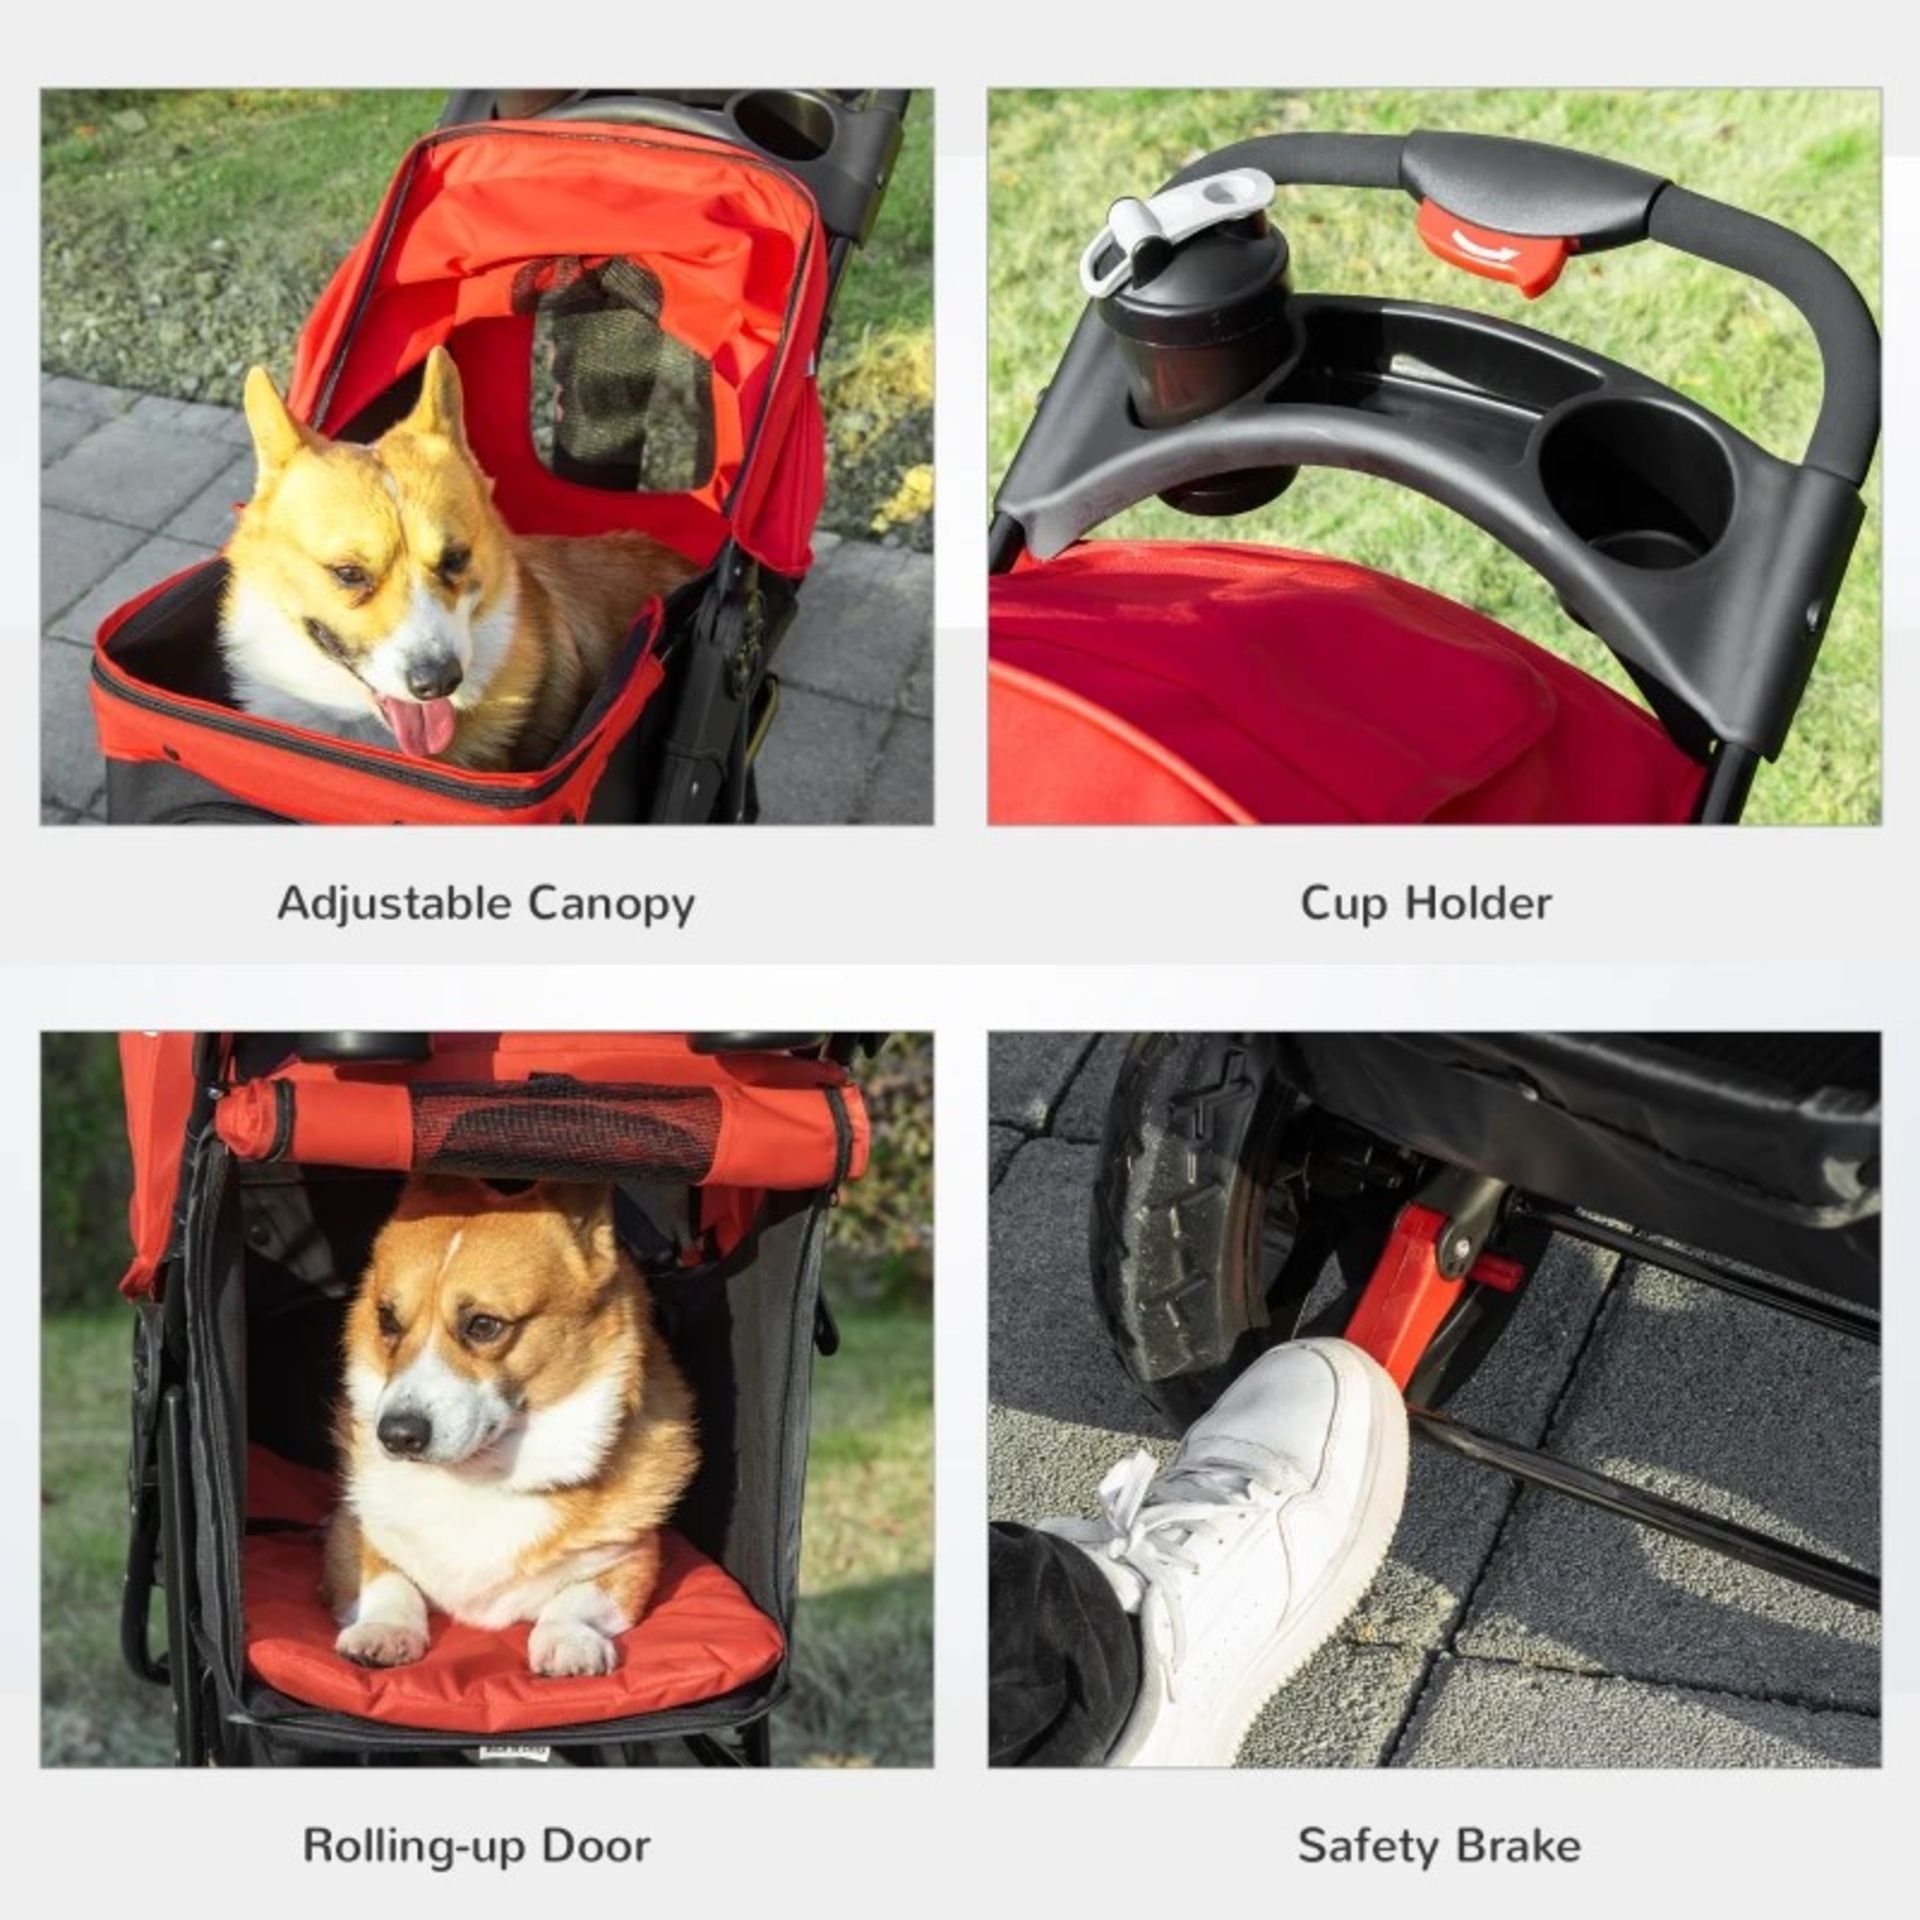 RRP £146.99 - Oxford Cloth Folding 3-Wheel Pet Stroller Dog Trolley Red/Black - 2 IN 1 DESIGN: Front - Image 3 of 4